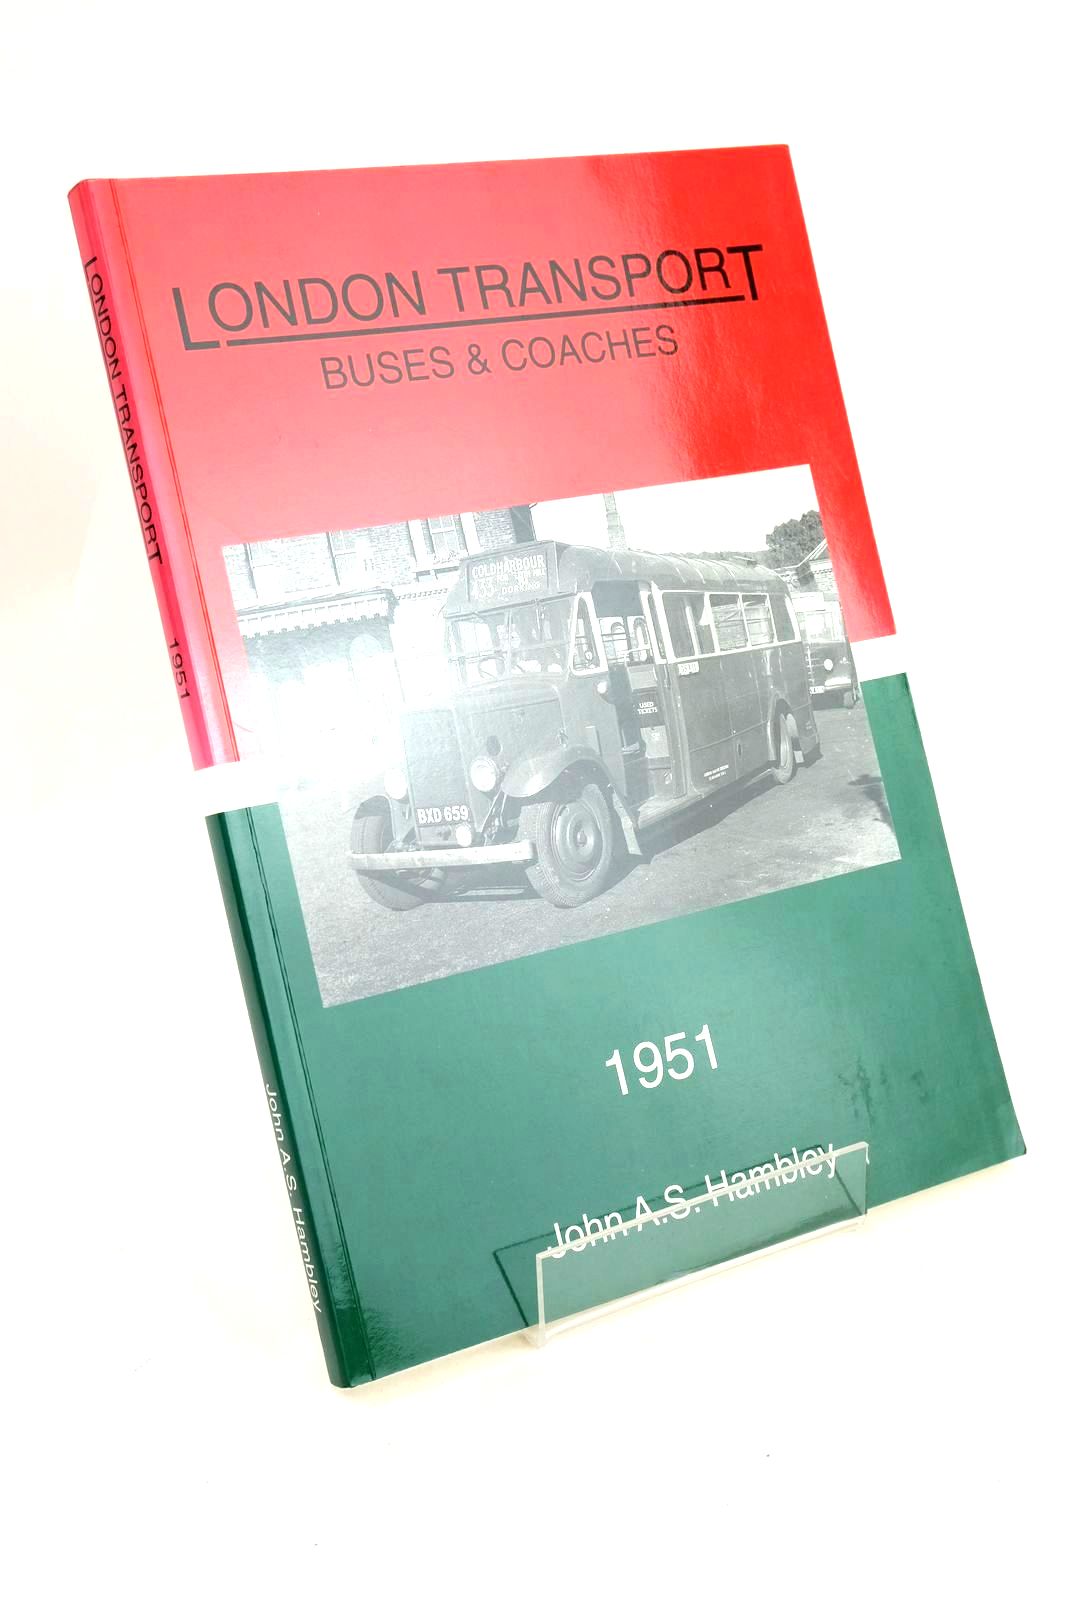 Photo of LONDON TRANSPORT BUSES & COACHES 1951 written by Hambley, John A.S. published by Self Publishing Association Ltd. (STOCK CODE: 1327385)  for sale by Stella & Rose's Books